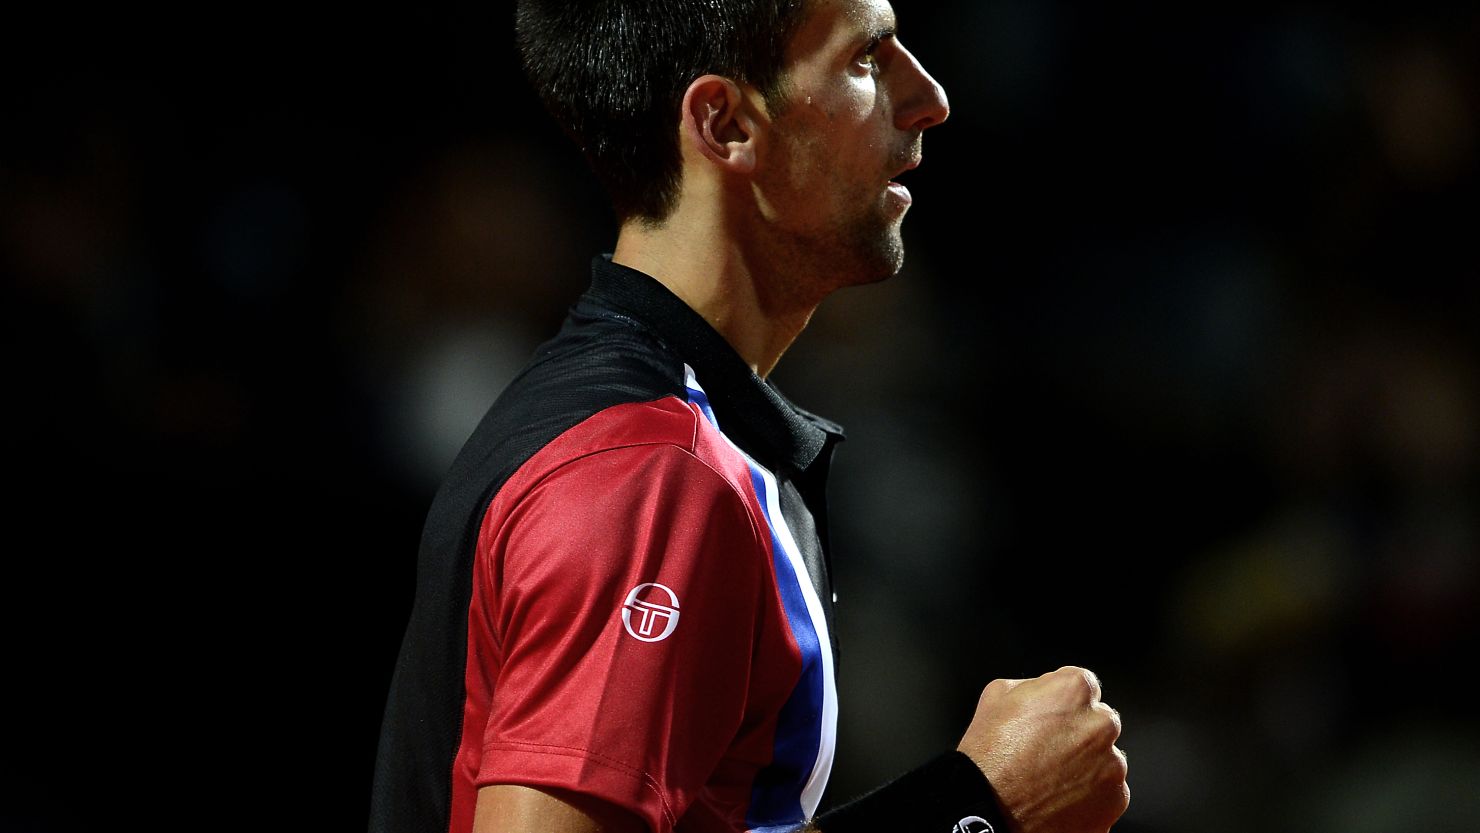 Novak Djokovic was in a hurry to close out victory against Bernard Tomic in Rome.